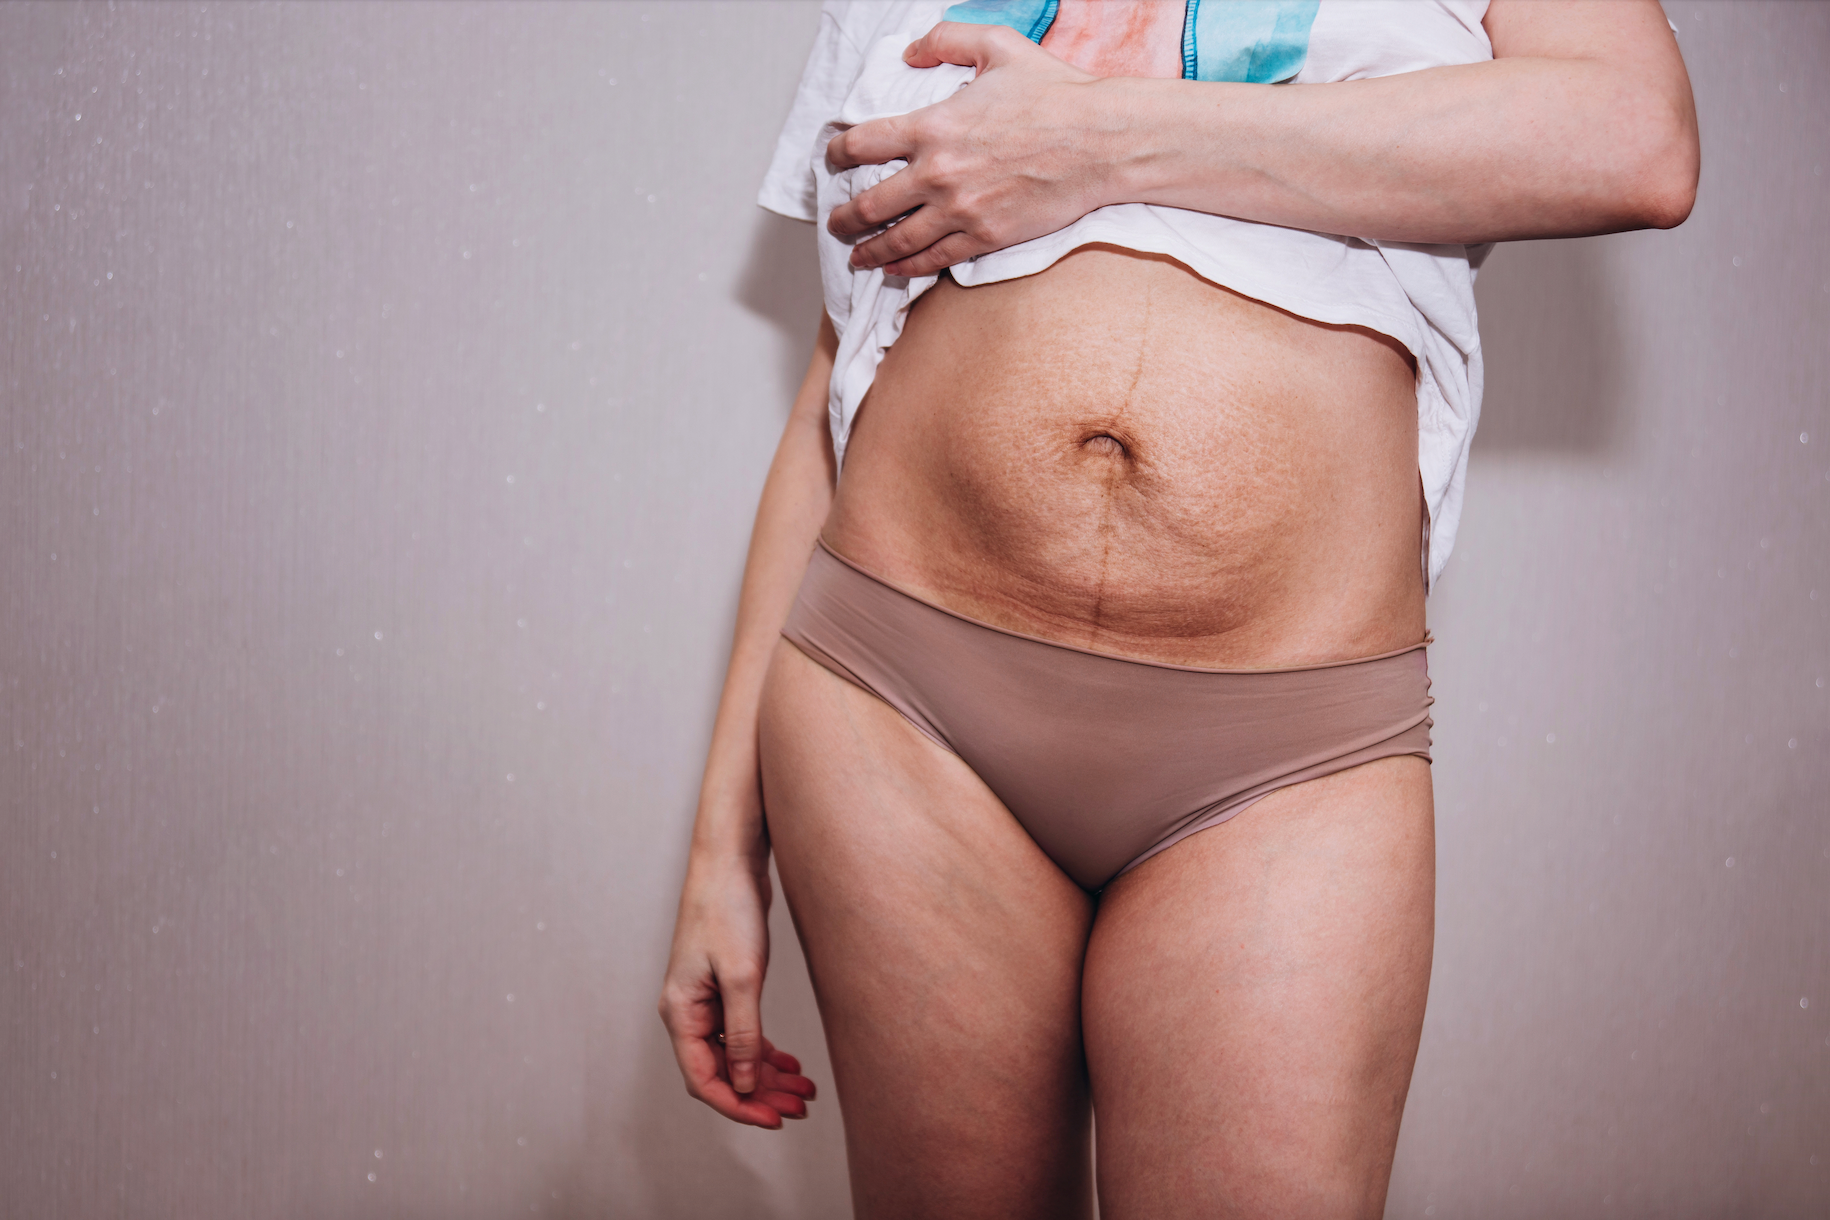 Do Stretch Marks Come From Losing Or Gaining Weight?